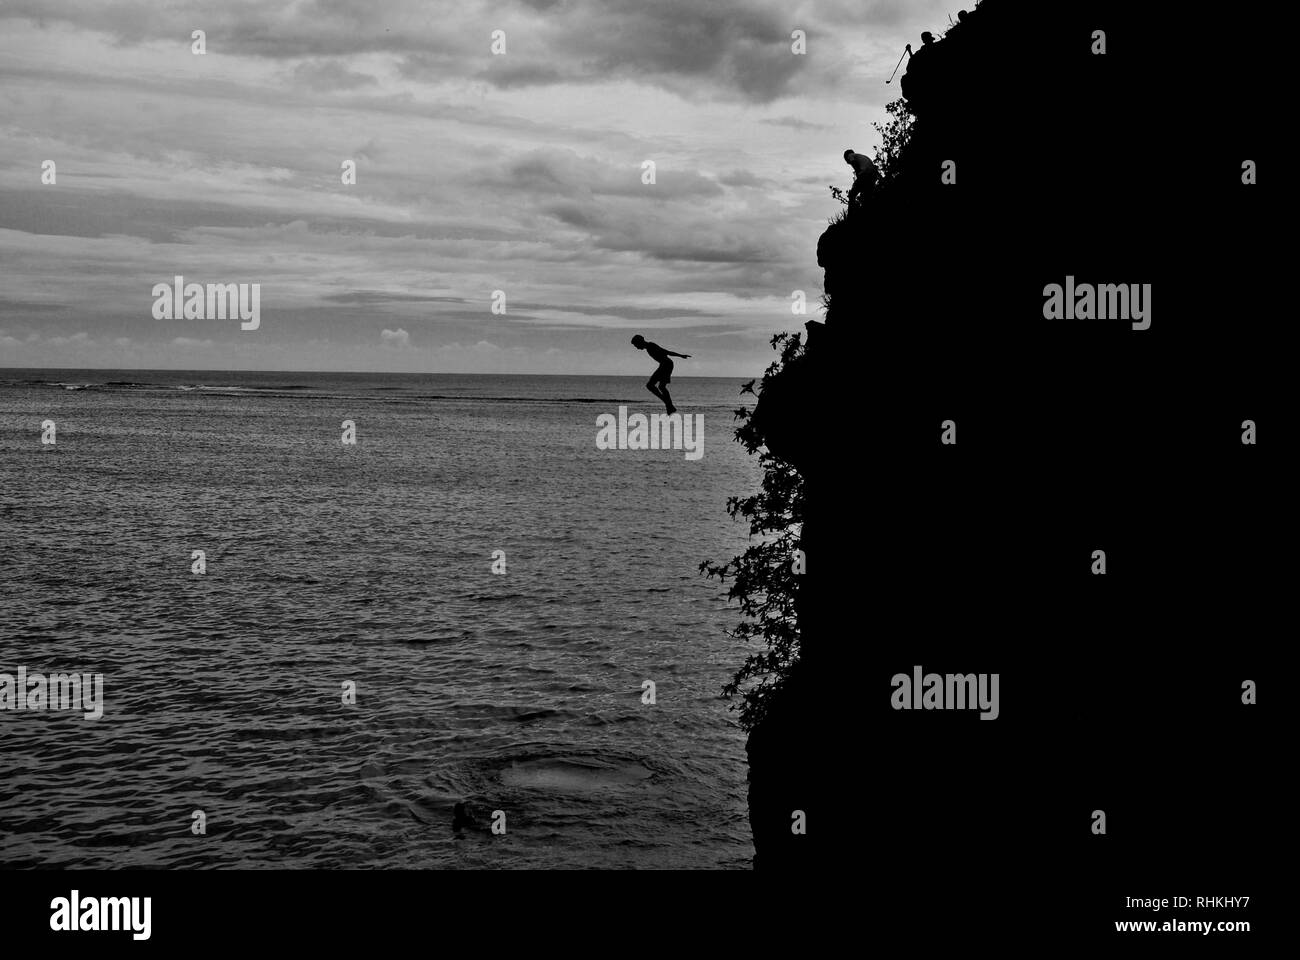 Black and white photograph of a boy jumping courageously into the sea in the south of mauritius island at macondé beach Stock Photo